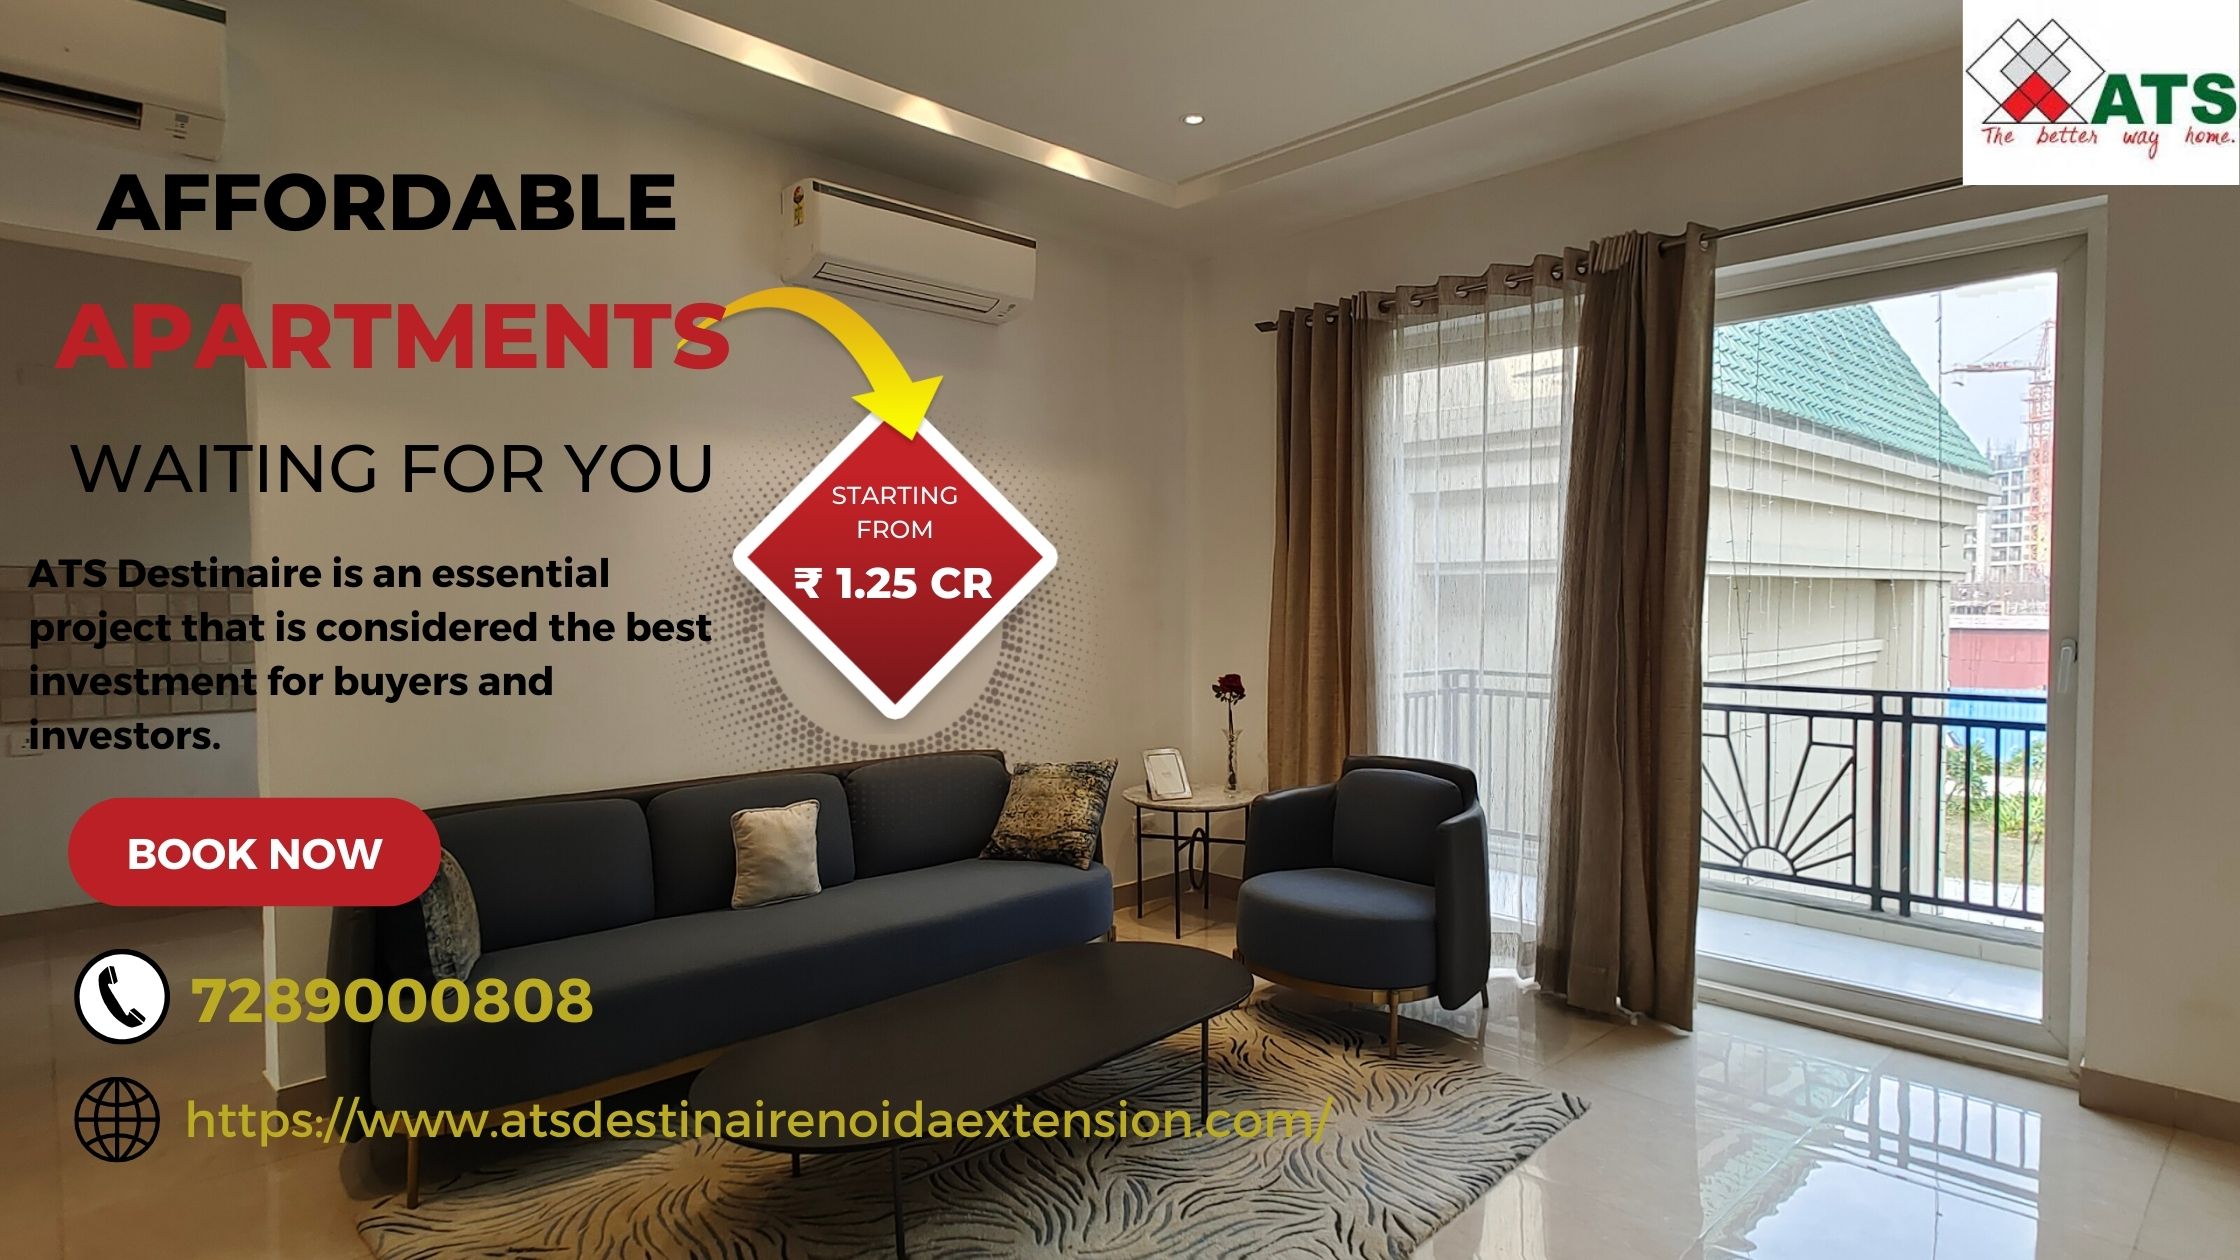 Advantages of affordable housing in finding a property in ATS Destinaire Noida - AtoAllinks